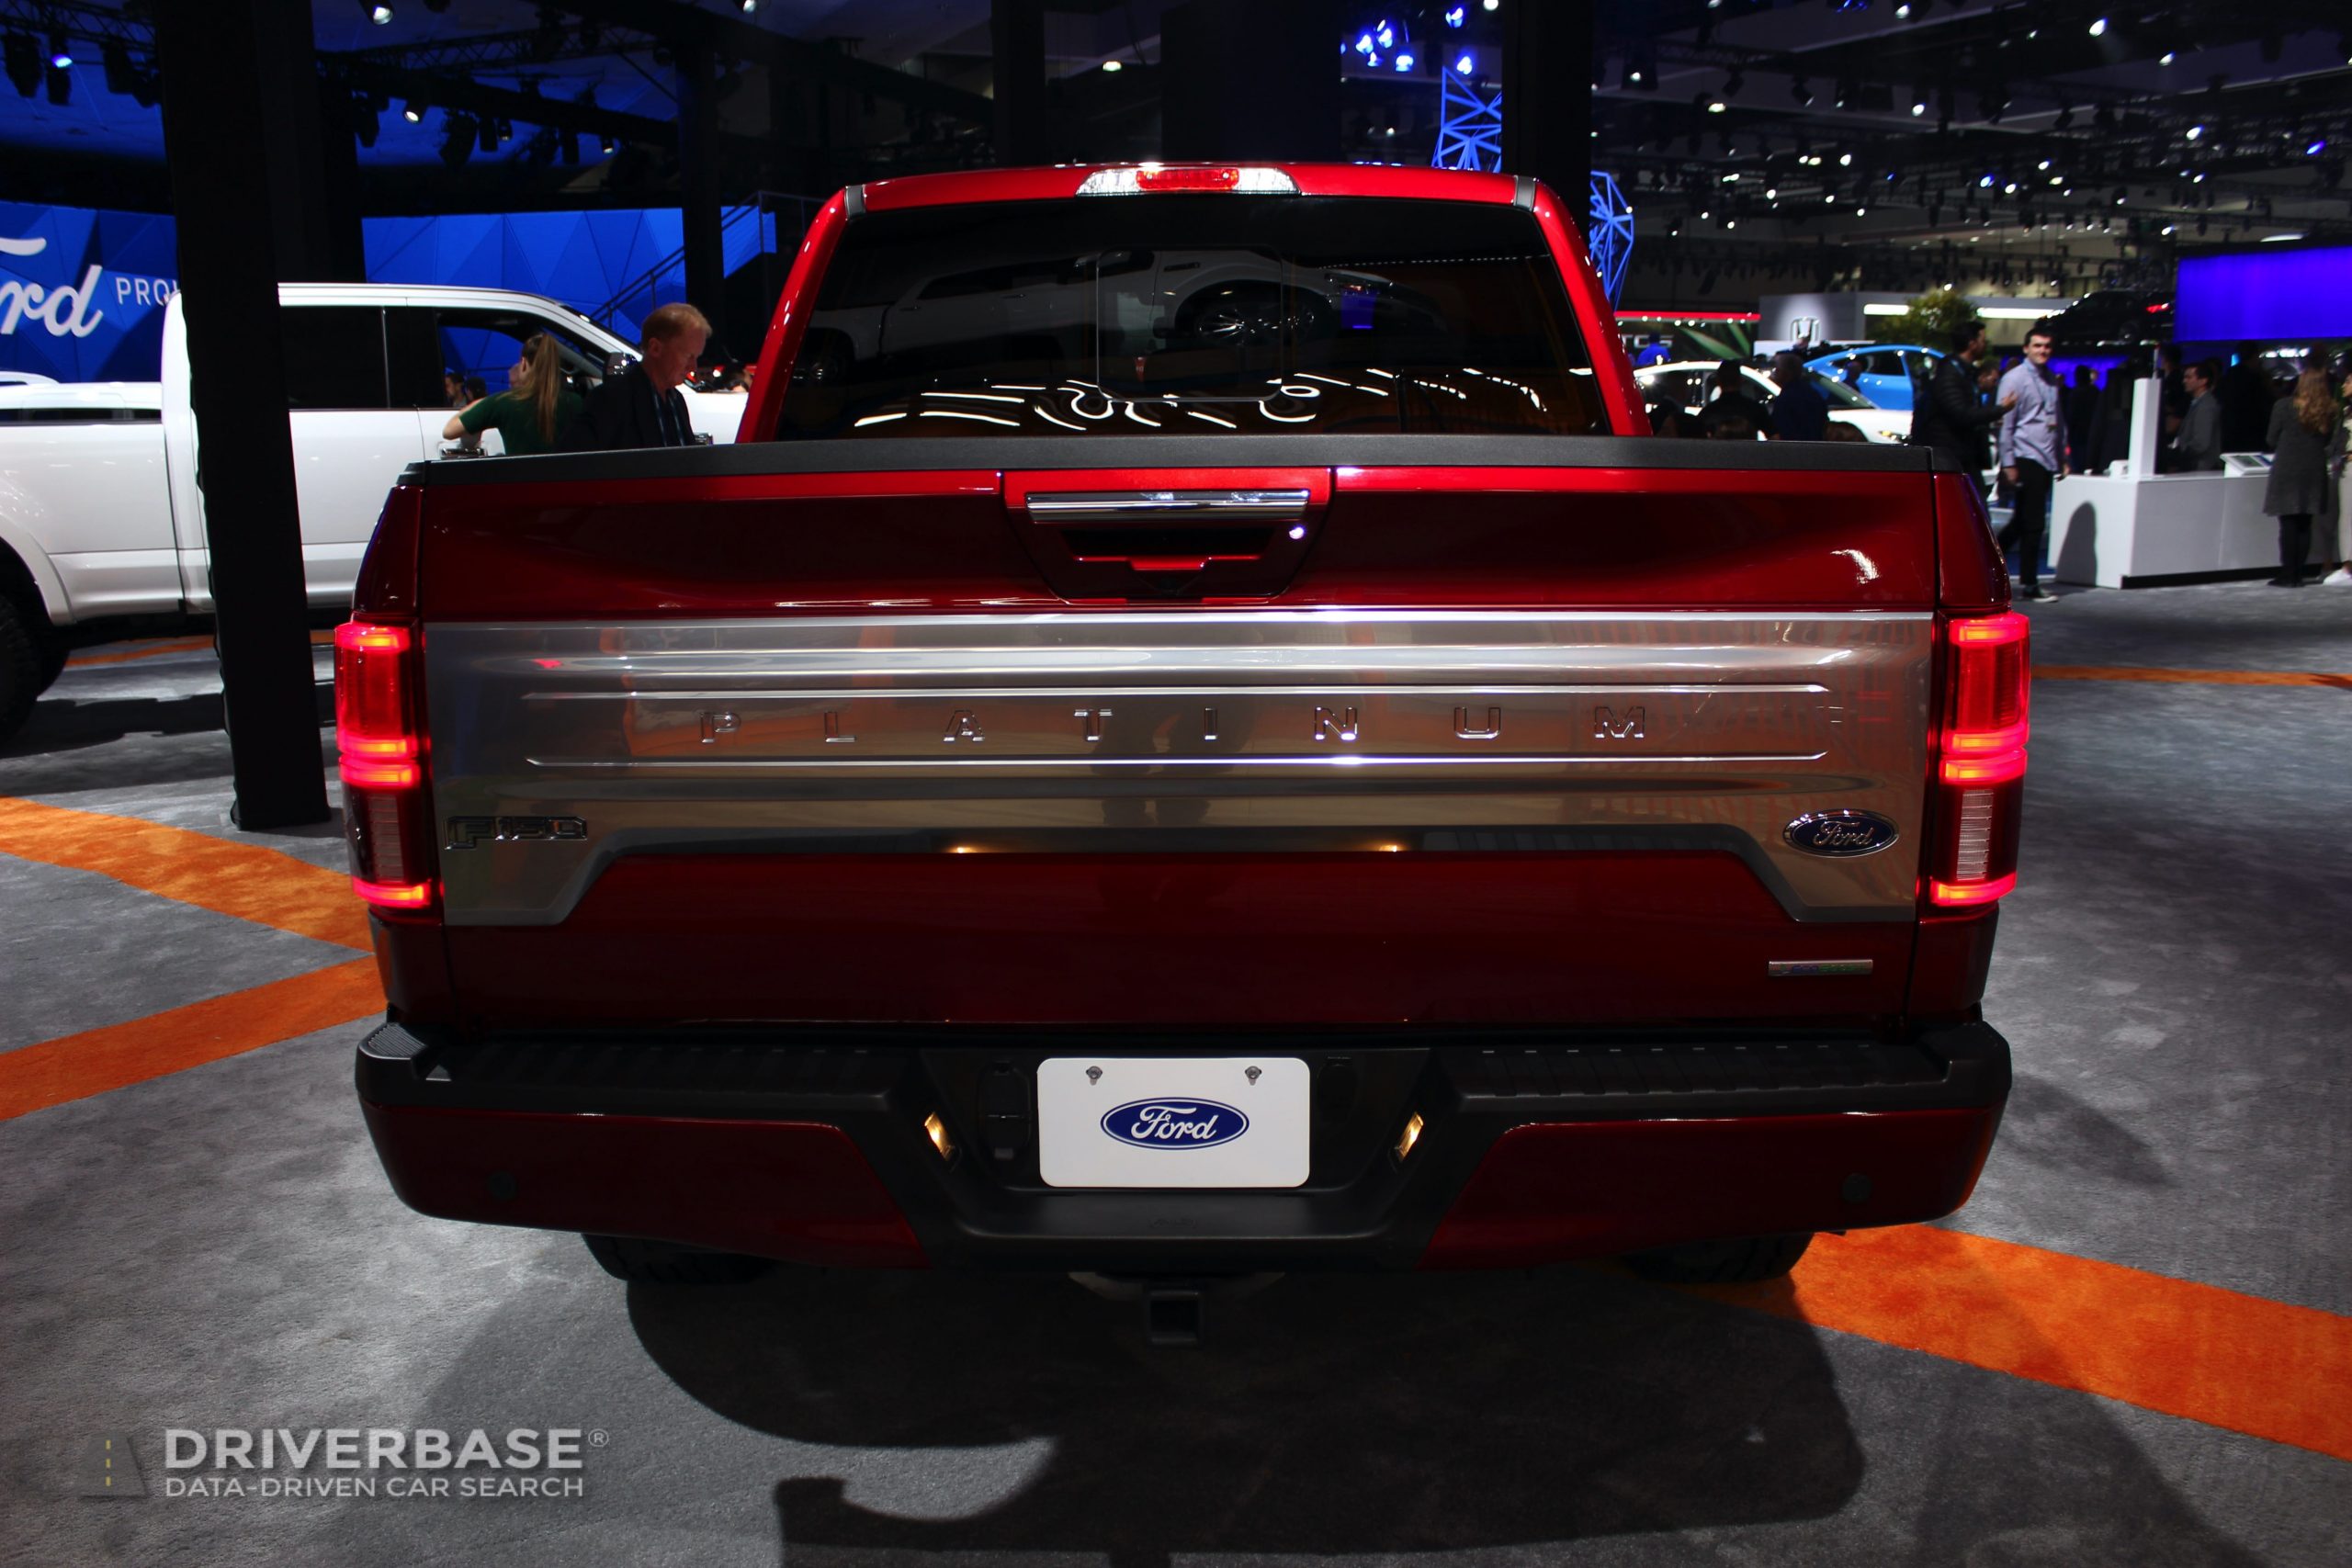 2020 Ford F-150 Platinum at the 2019 Los Angeles Auto Show